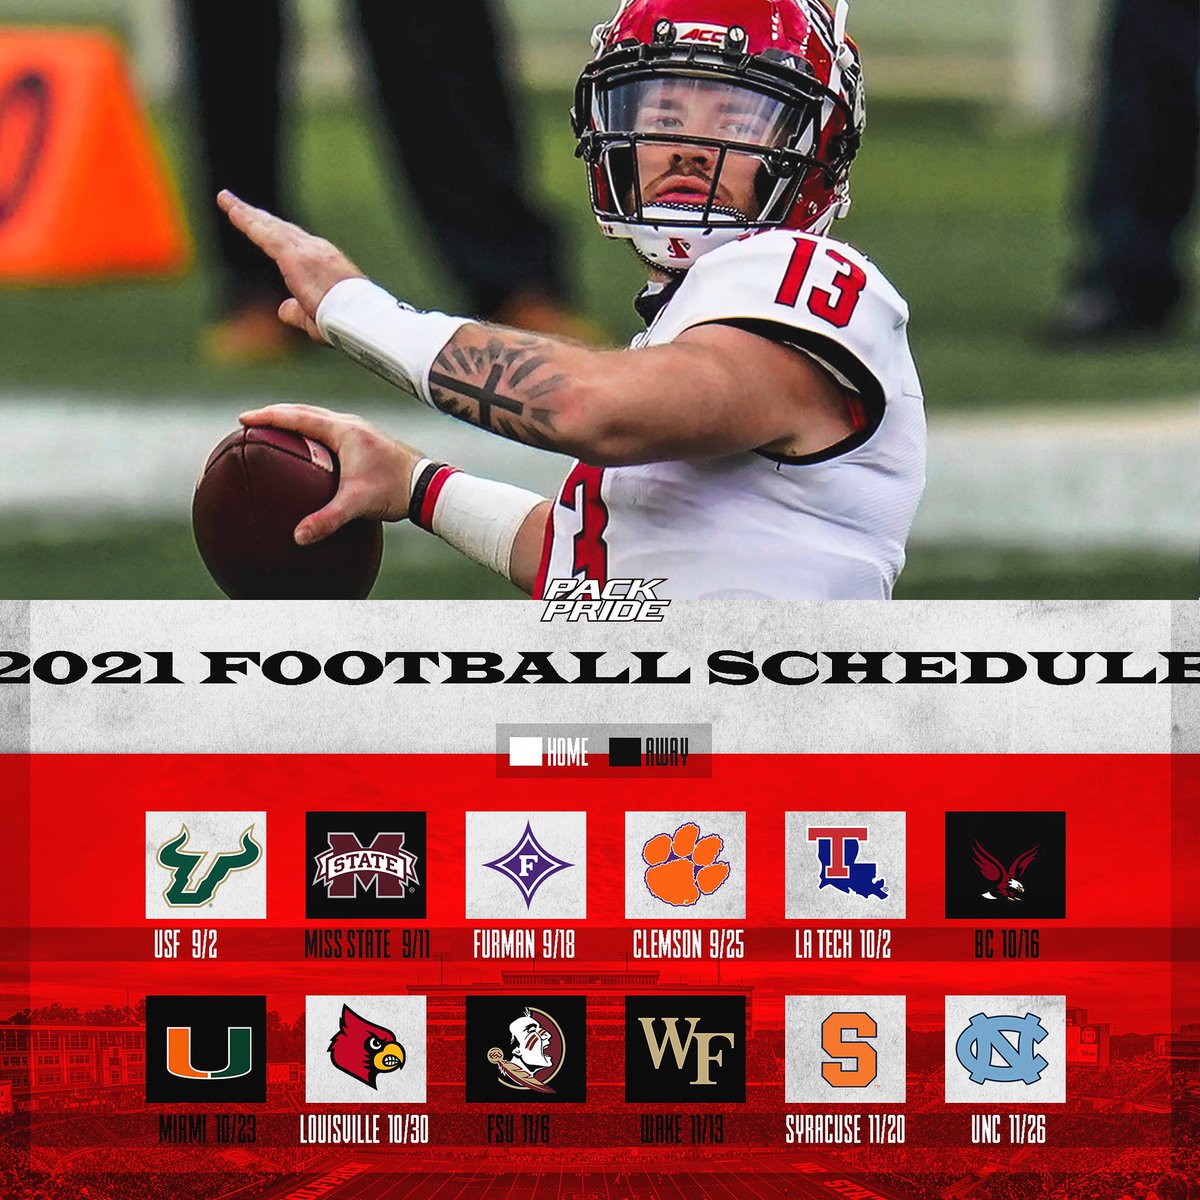 Ncsu Football Schedule 2022 Pack Pride On Twitter: "🚨 The 2021 Nc State Football Schedule Is Out! 🚨  👇 Check Out The Full Breakdown Here 👇 Https://T.co/Pc2Ncbmpiz" / Twitter